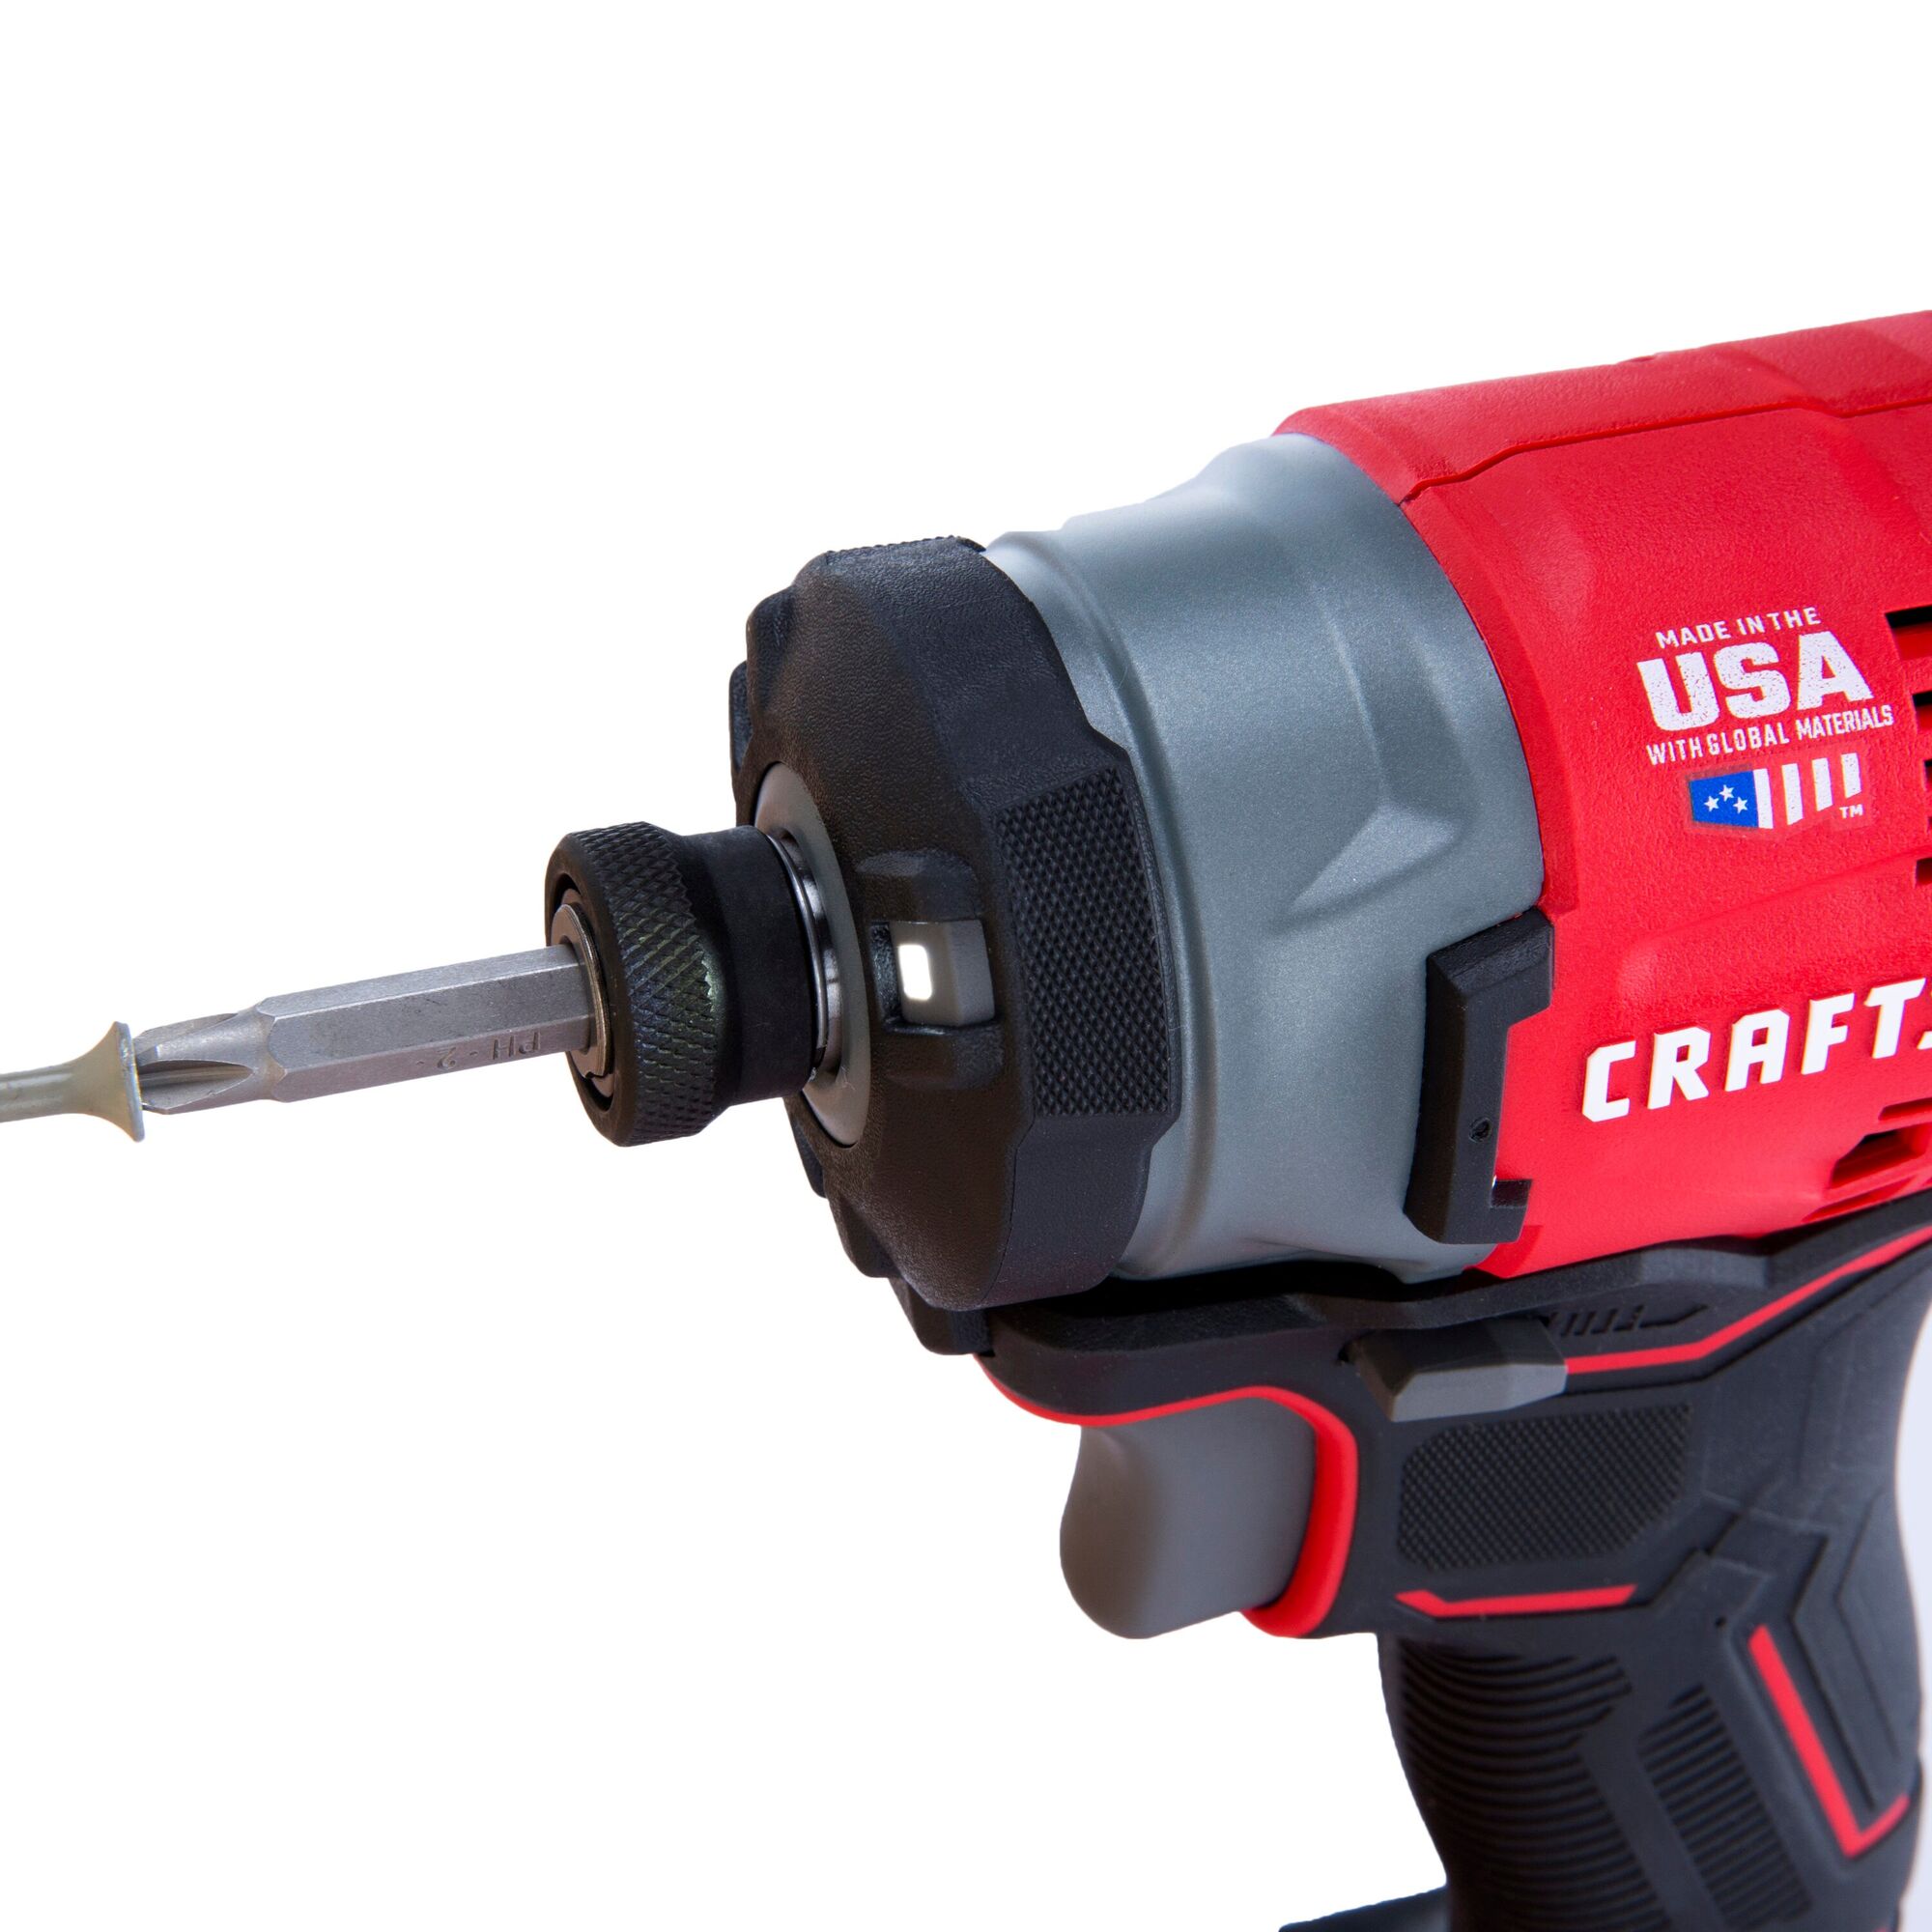 View of CRAFTSMAN Combo Kits: Power Tools highlighting product features